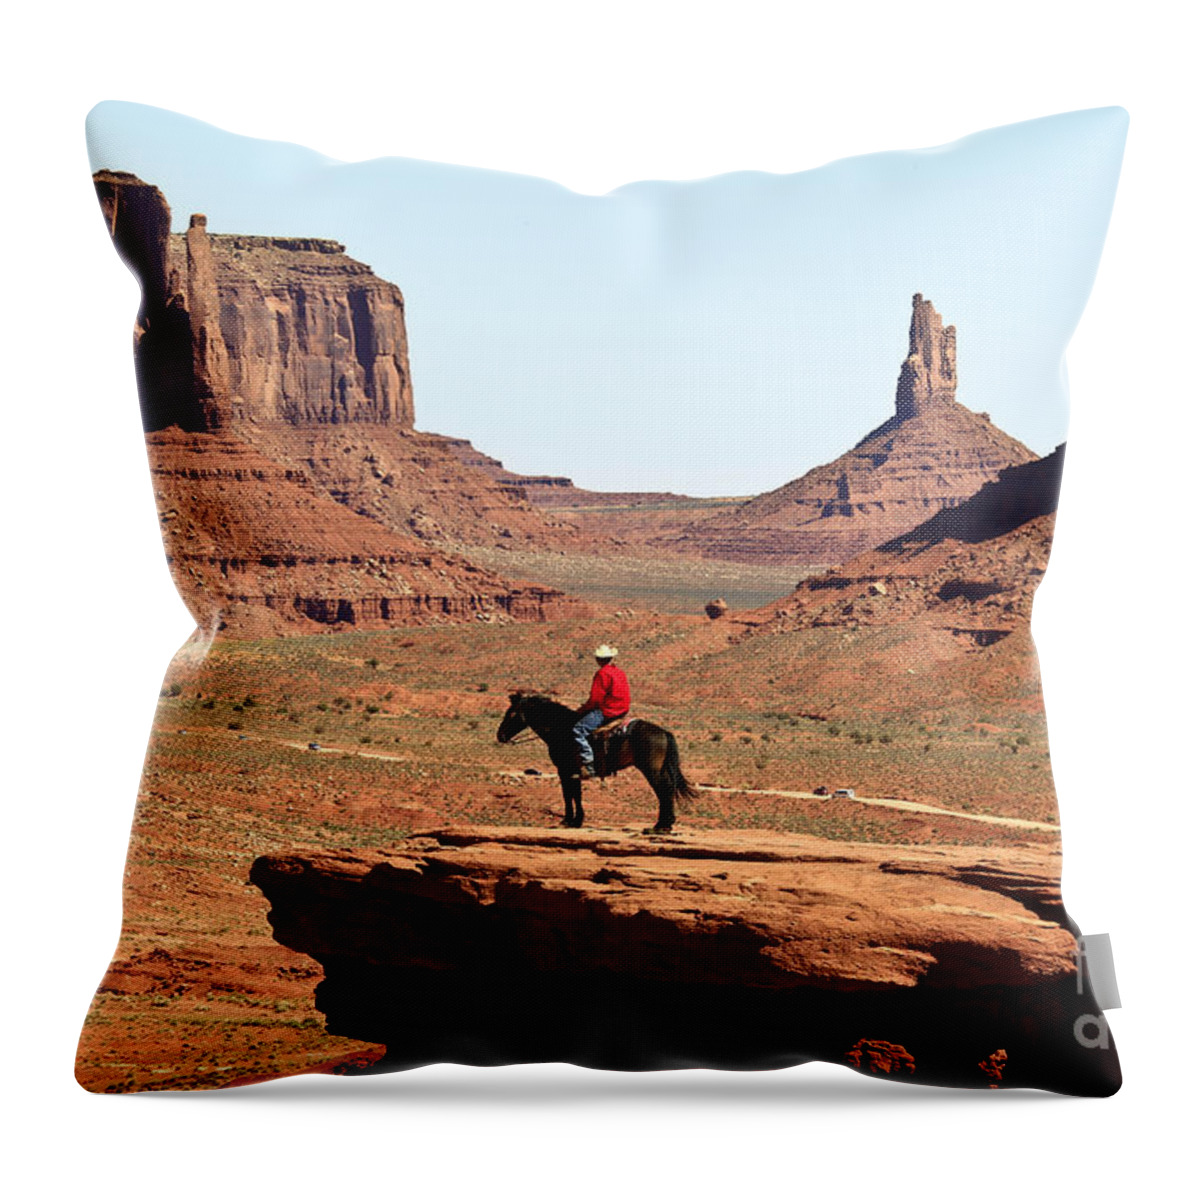 Arizona Throw Pillow featuring the photograph Taking in the View by Kathy McClure